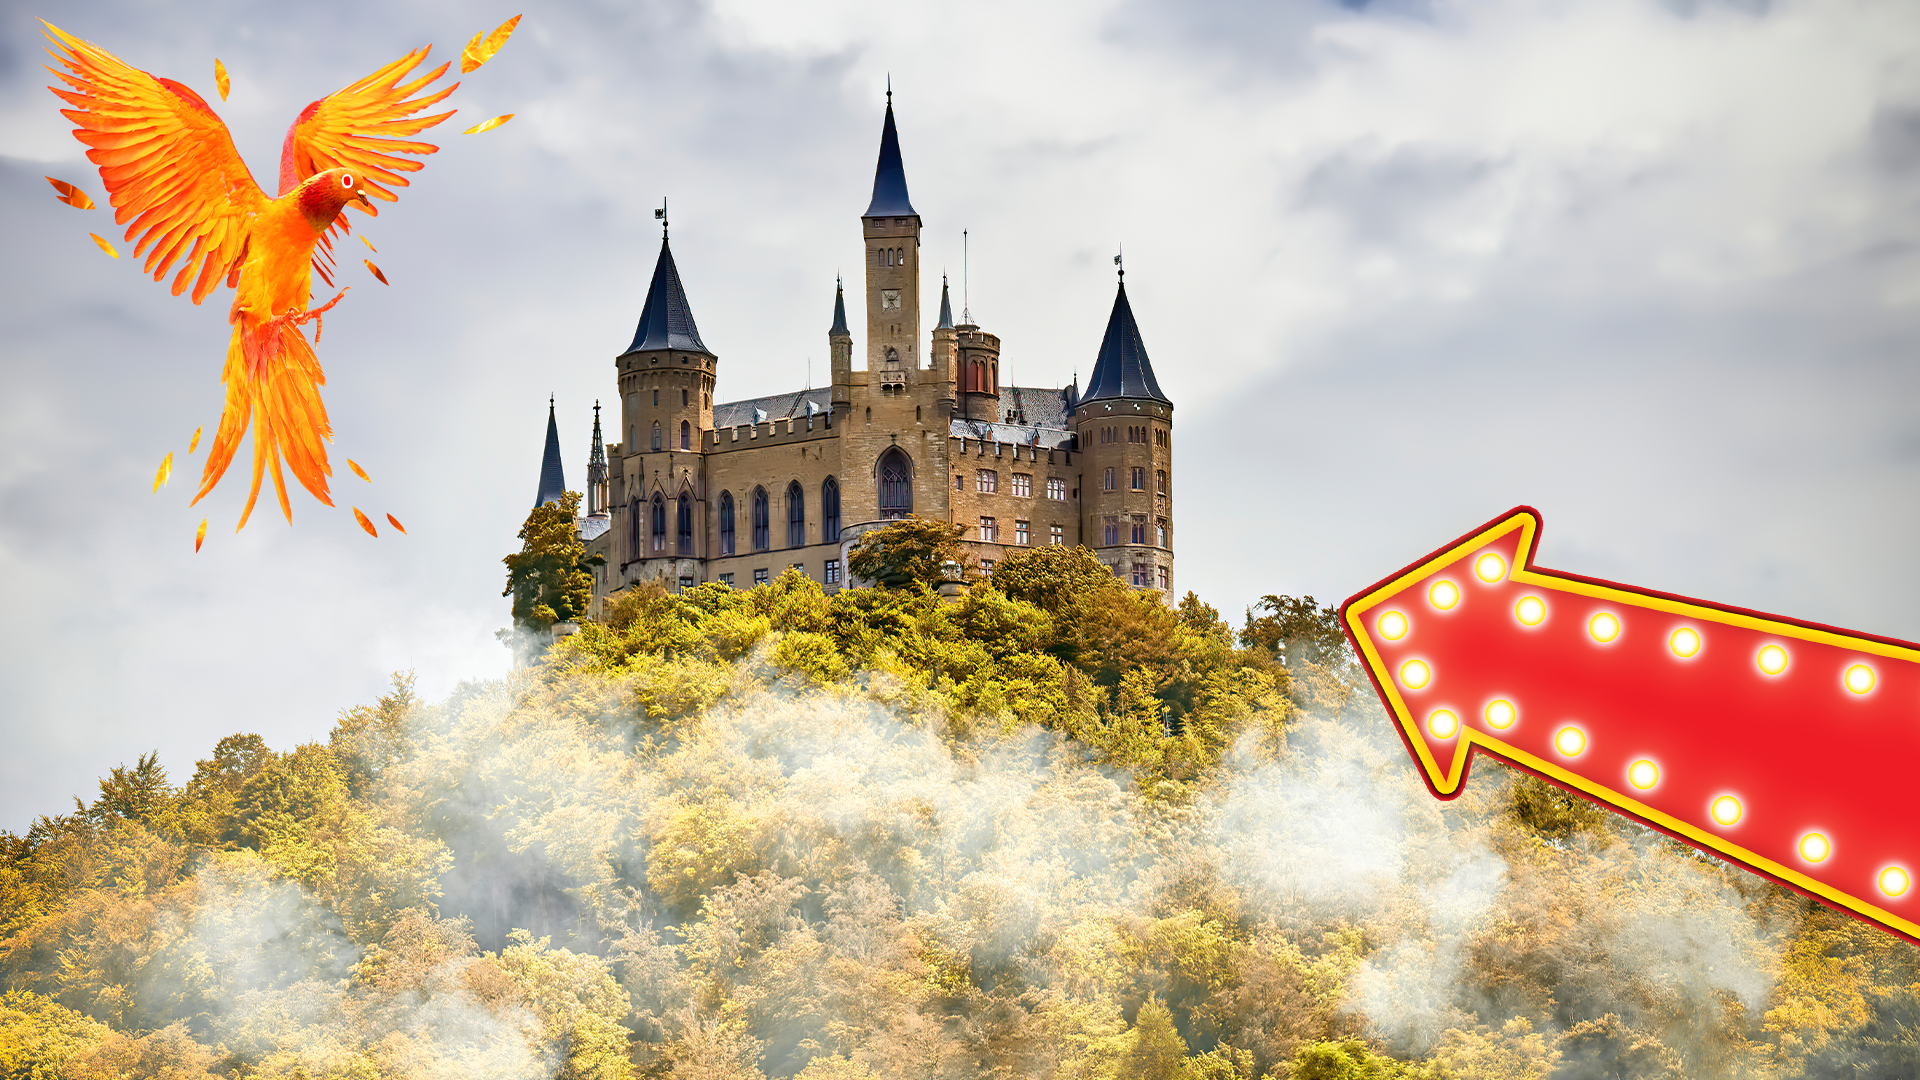 Magical looking castle with phoenix and arrow